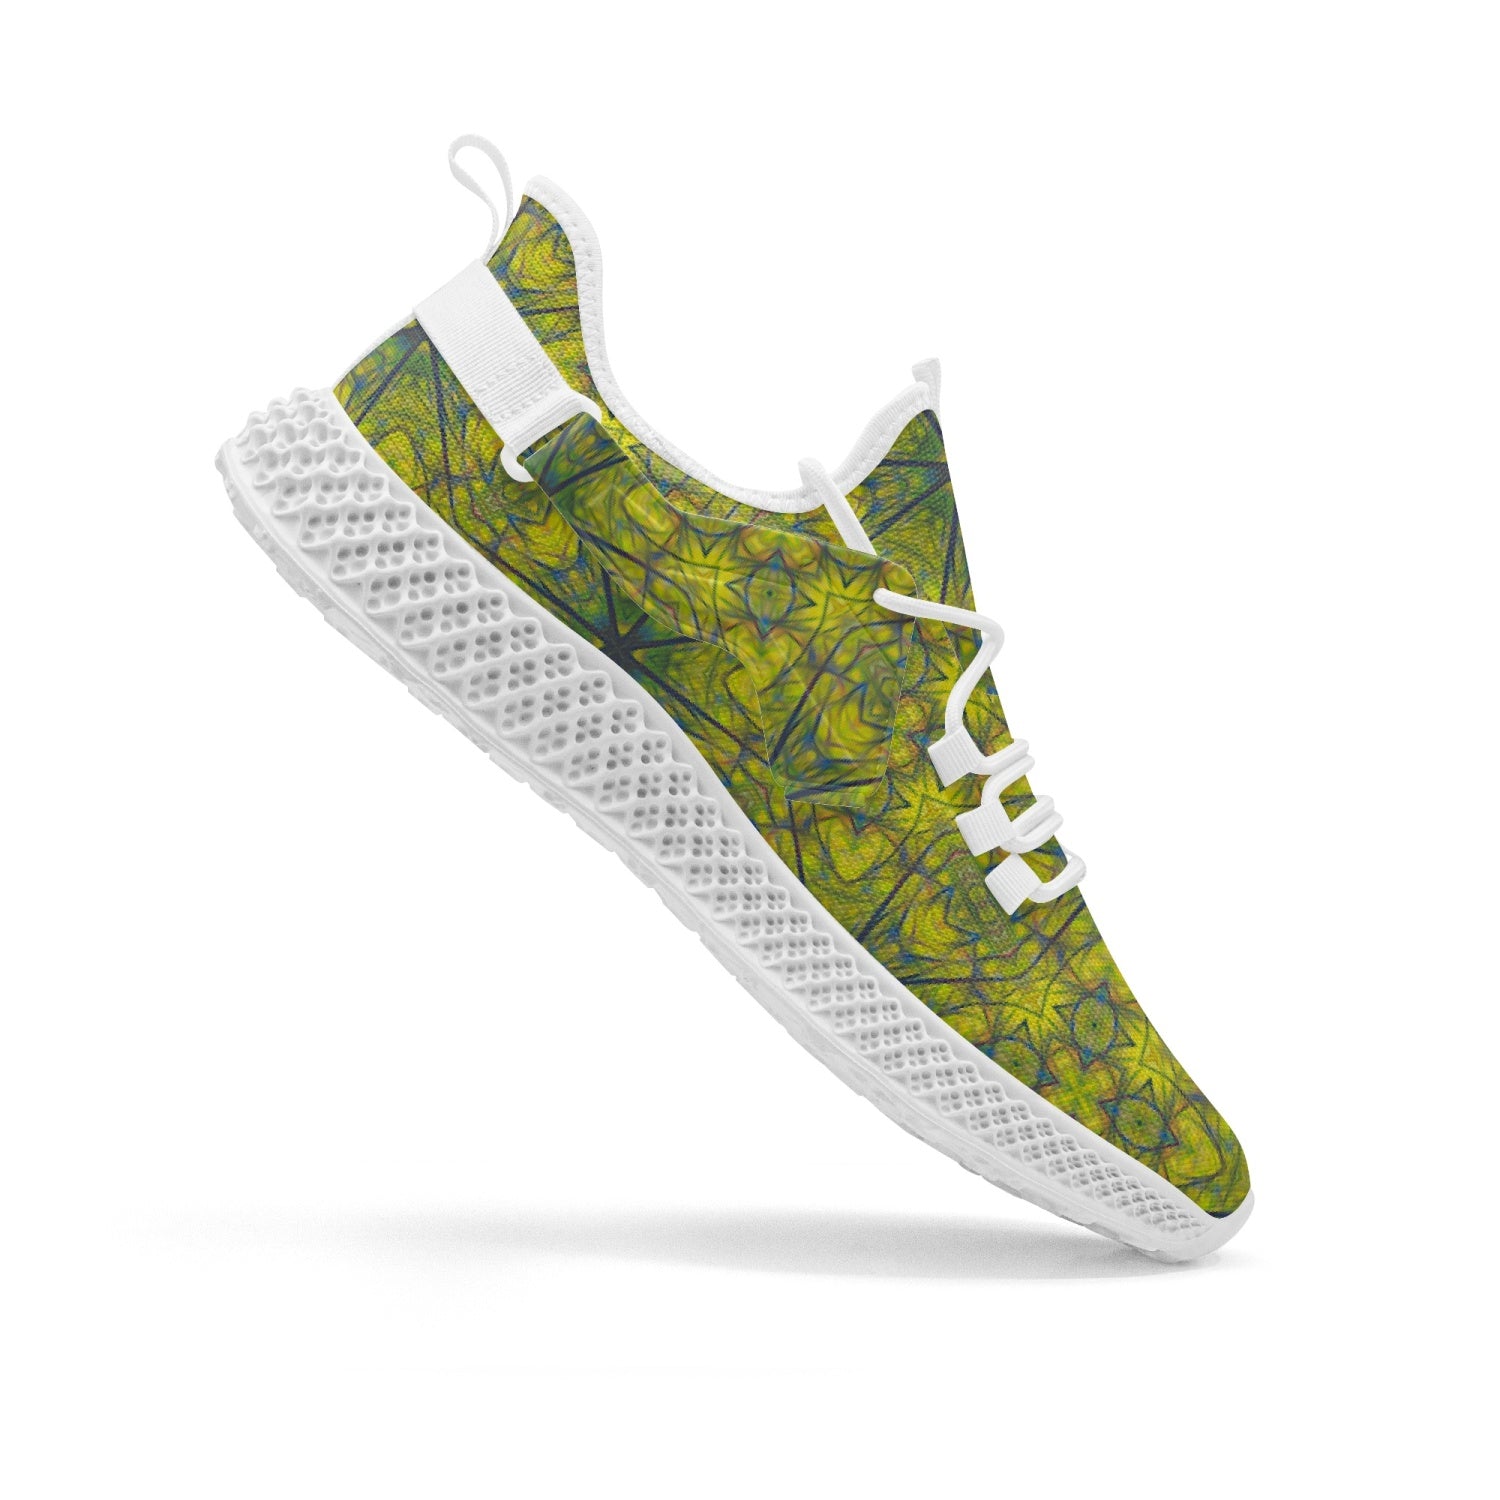 The Green Heart Chacra, Net Style Mesh Knit Sneakers, by Sensus Studio Design